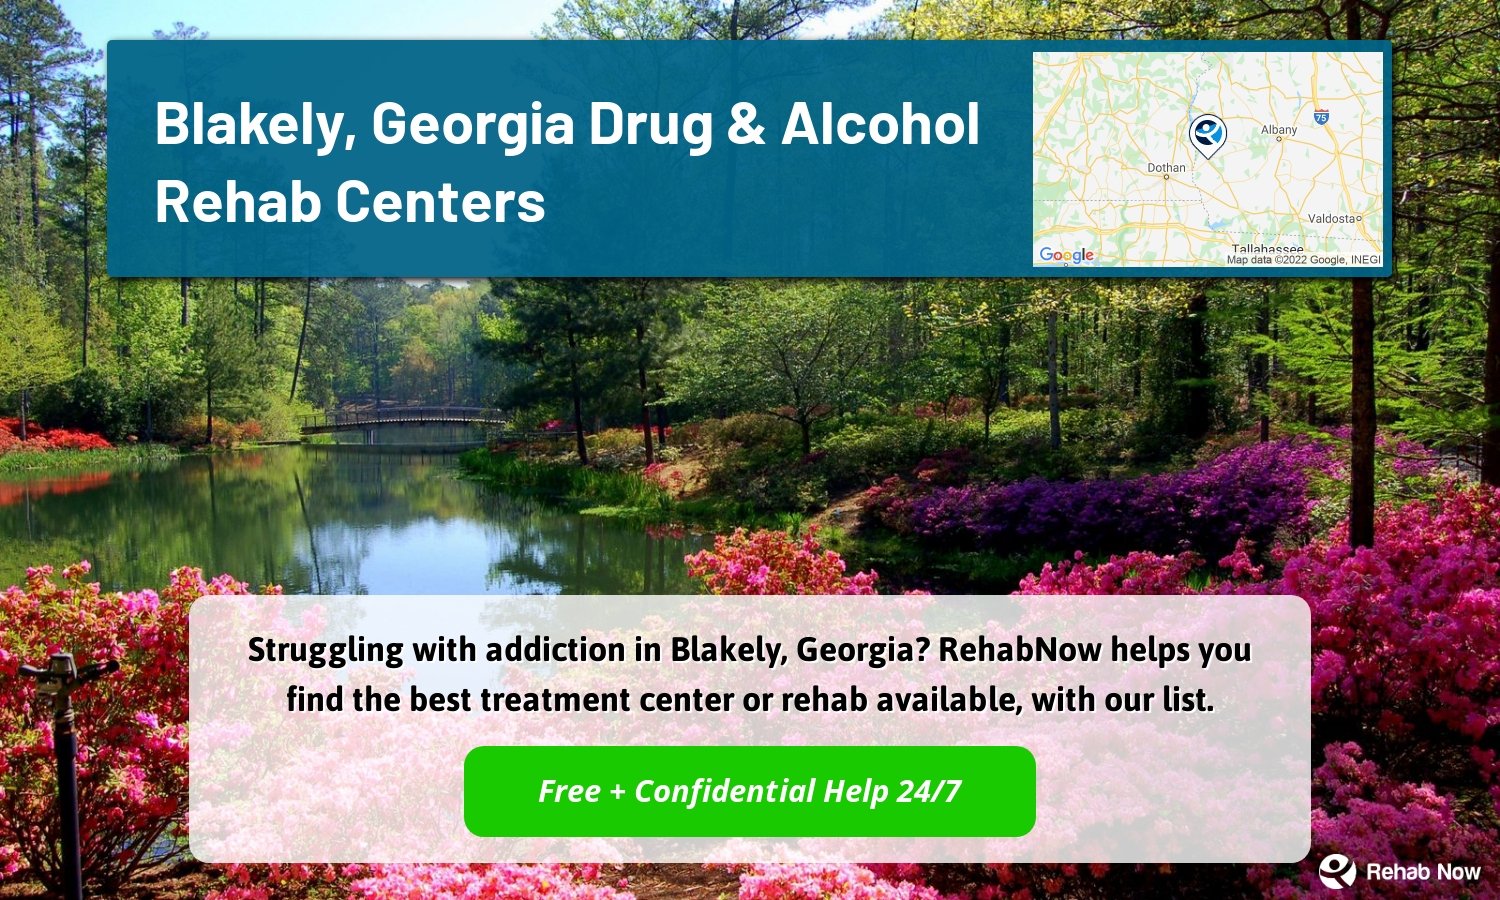 Struggling with addiction in Blakely, Georgia? RehabNow helps you find the best treatment center or rehab available, with our list.